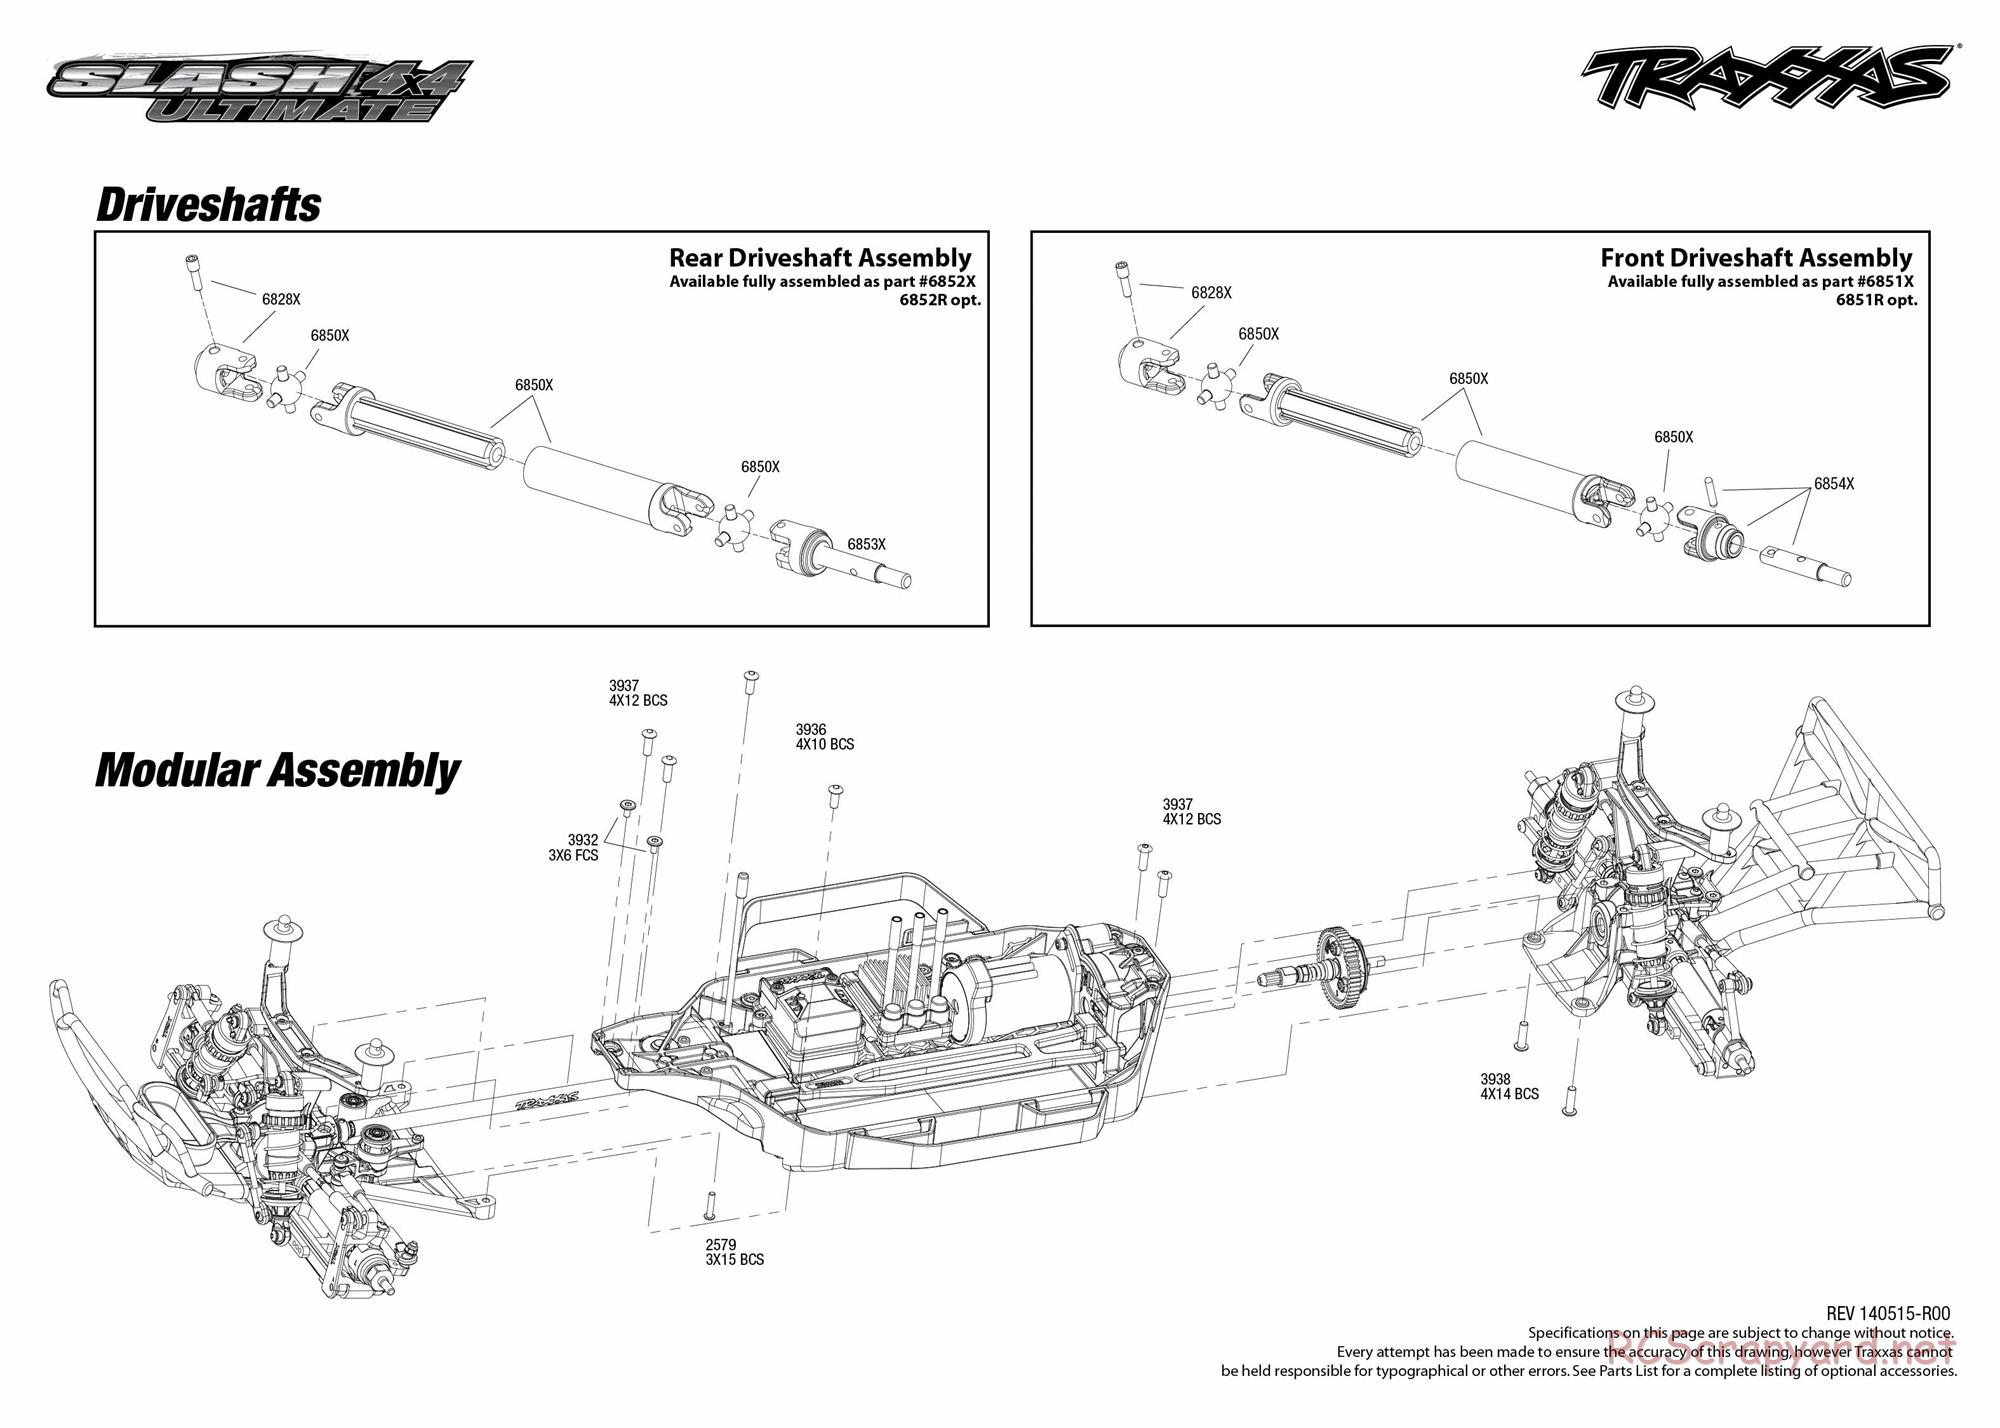 Traxxas - Slash 4x4 Ultimate (2014) - Exploded Views - Page 2